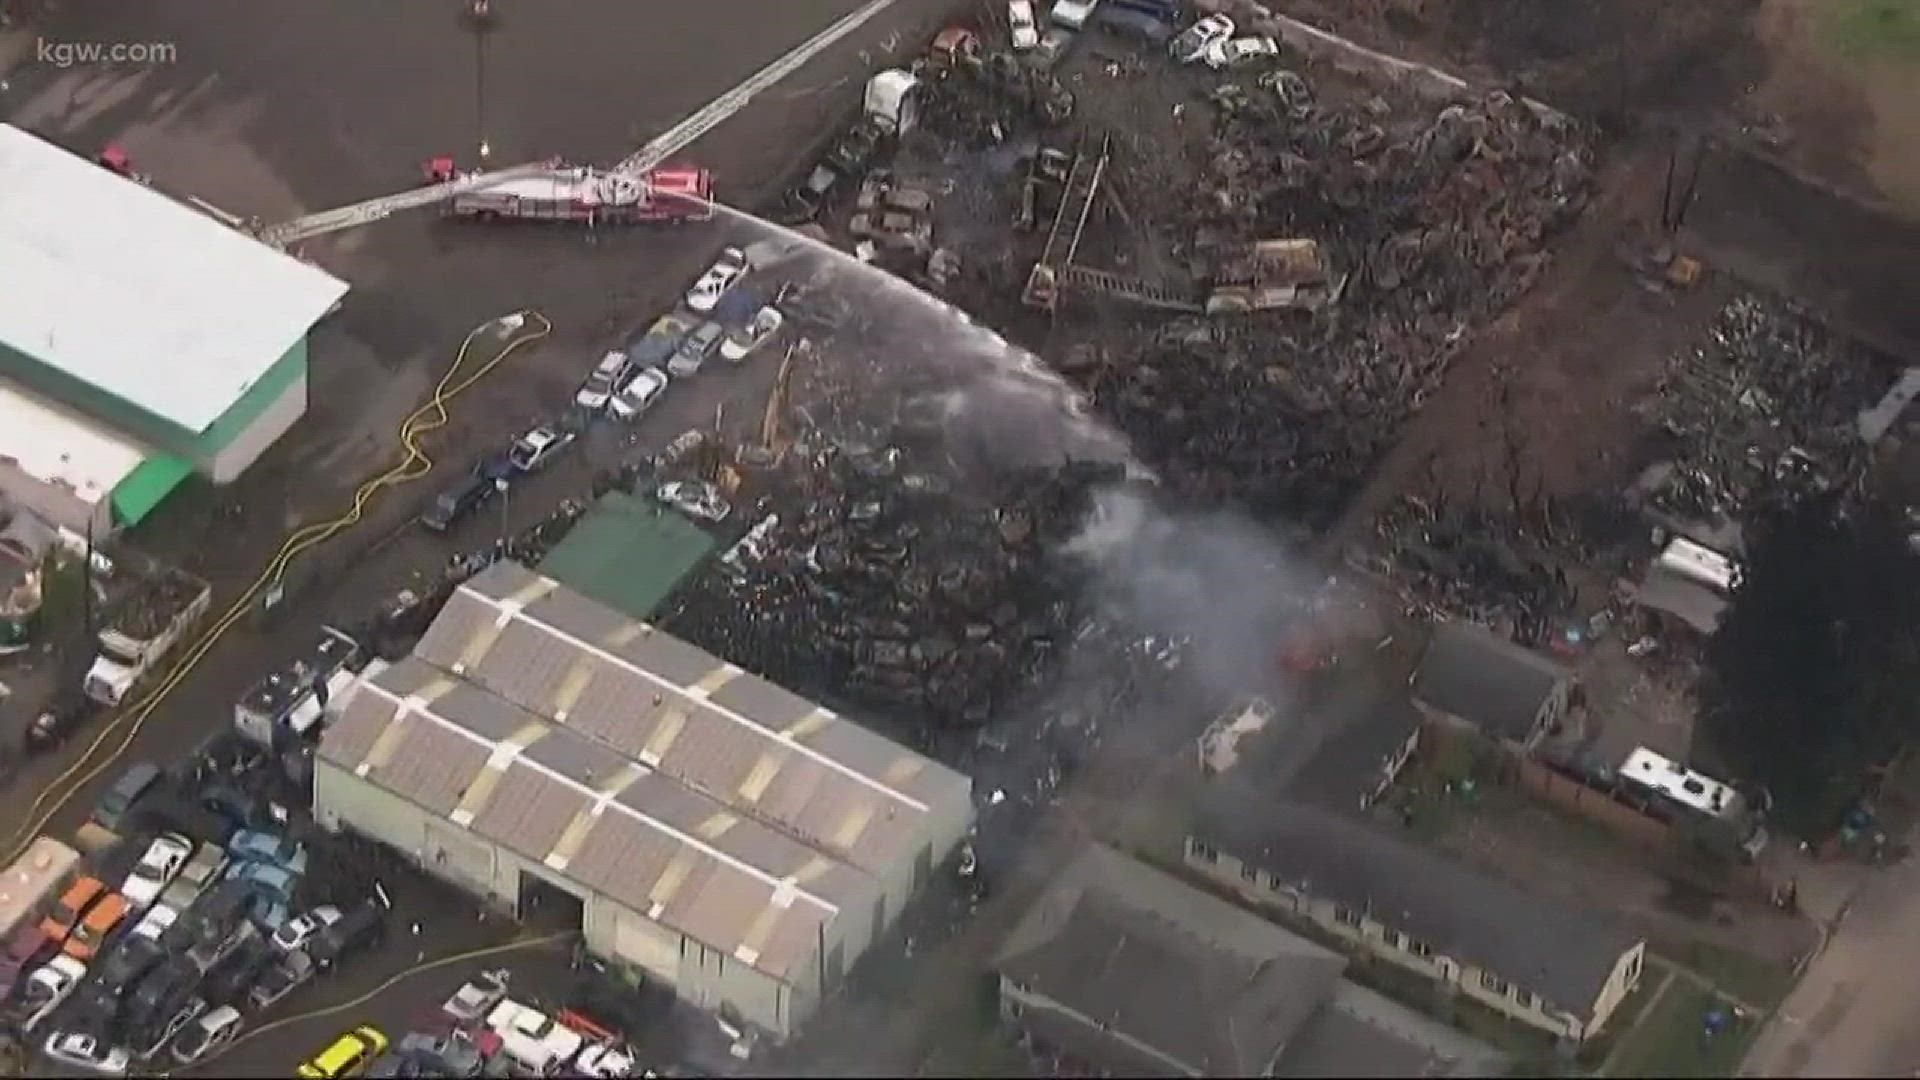 Fire officials say the massive Portland fire is completely out.